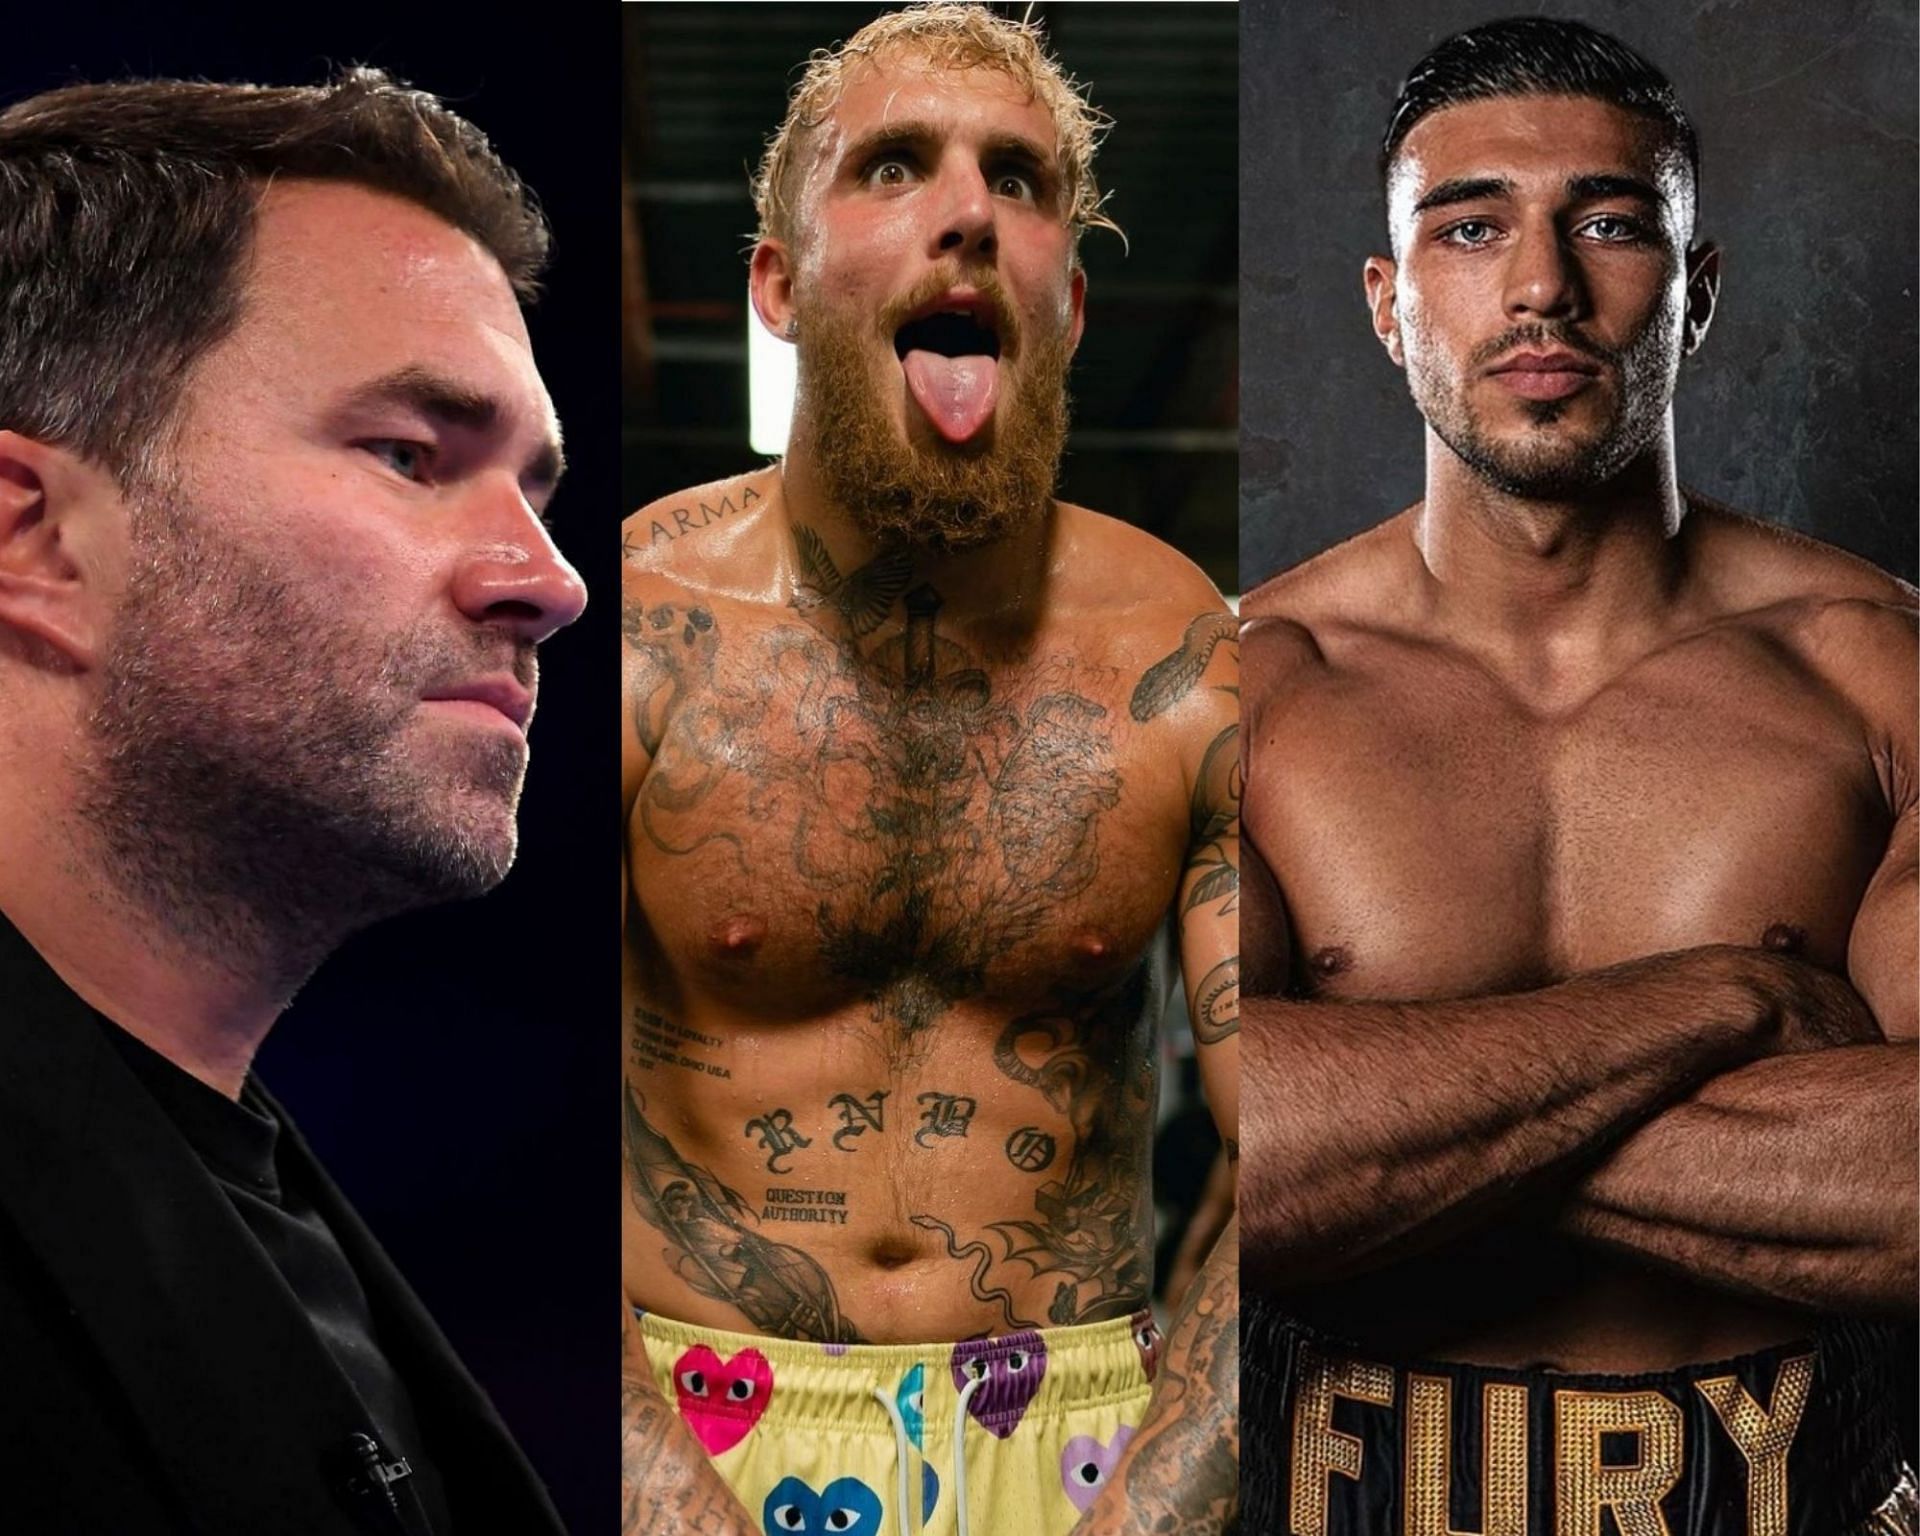 Eddie Hearn, Jake Paul, and Tommy Fury. (Photos by Getty Images (left), @jakepaul (middle) and @tommyfury (right) on Instagram)